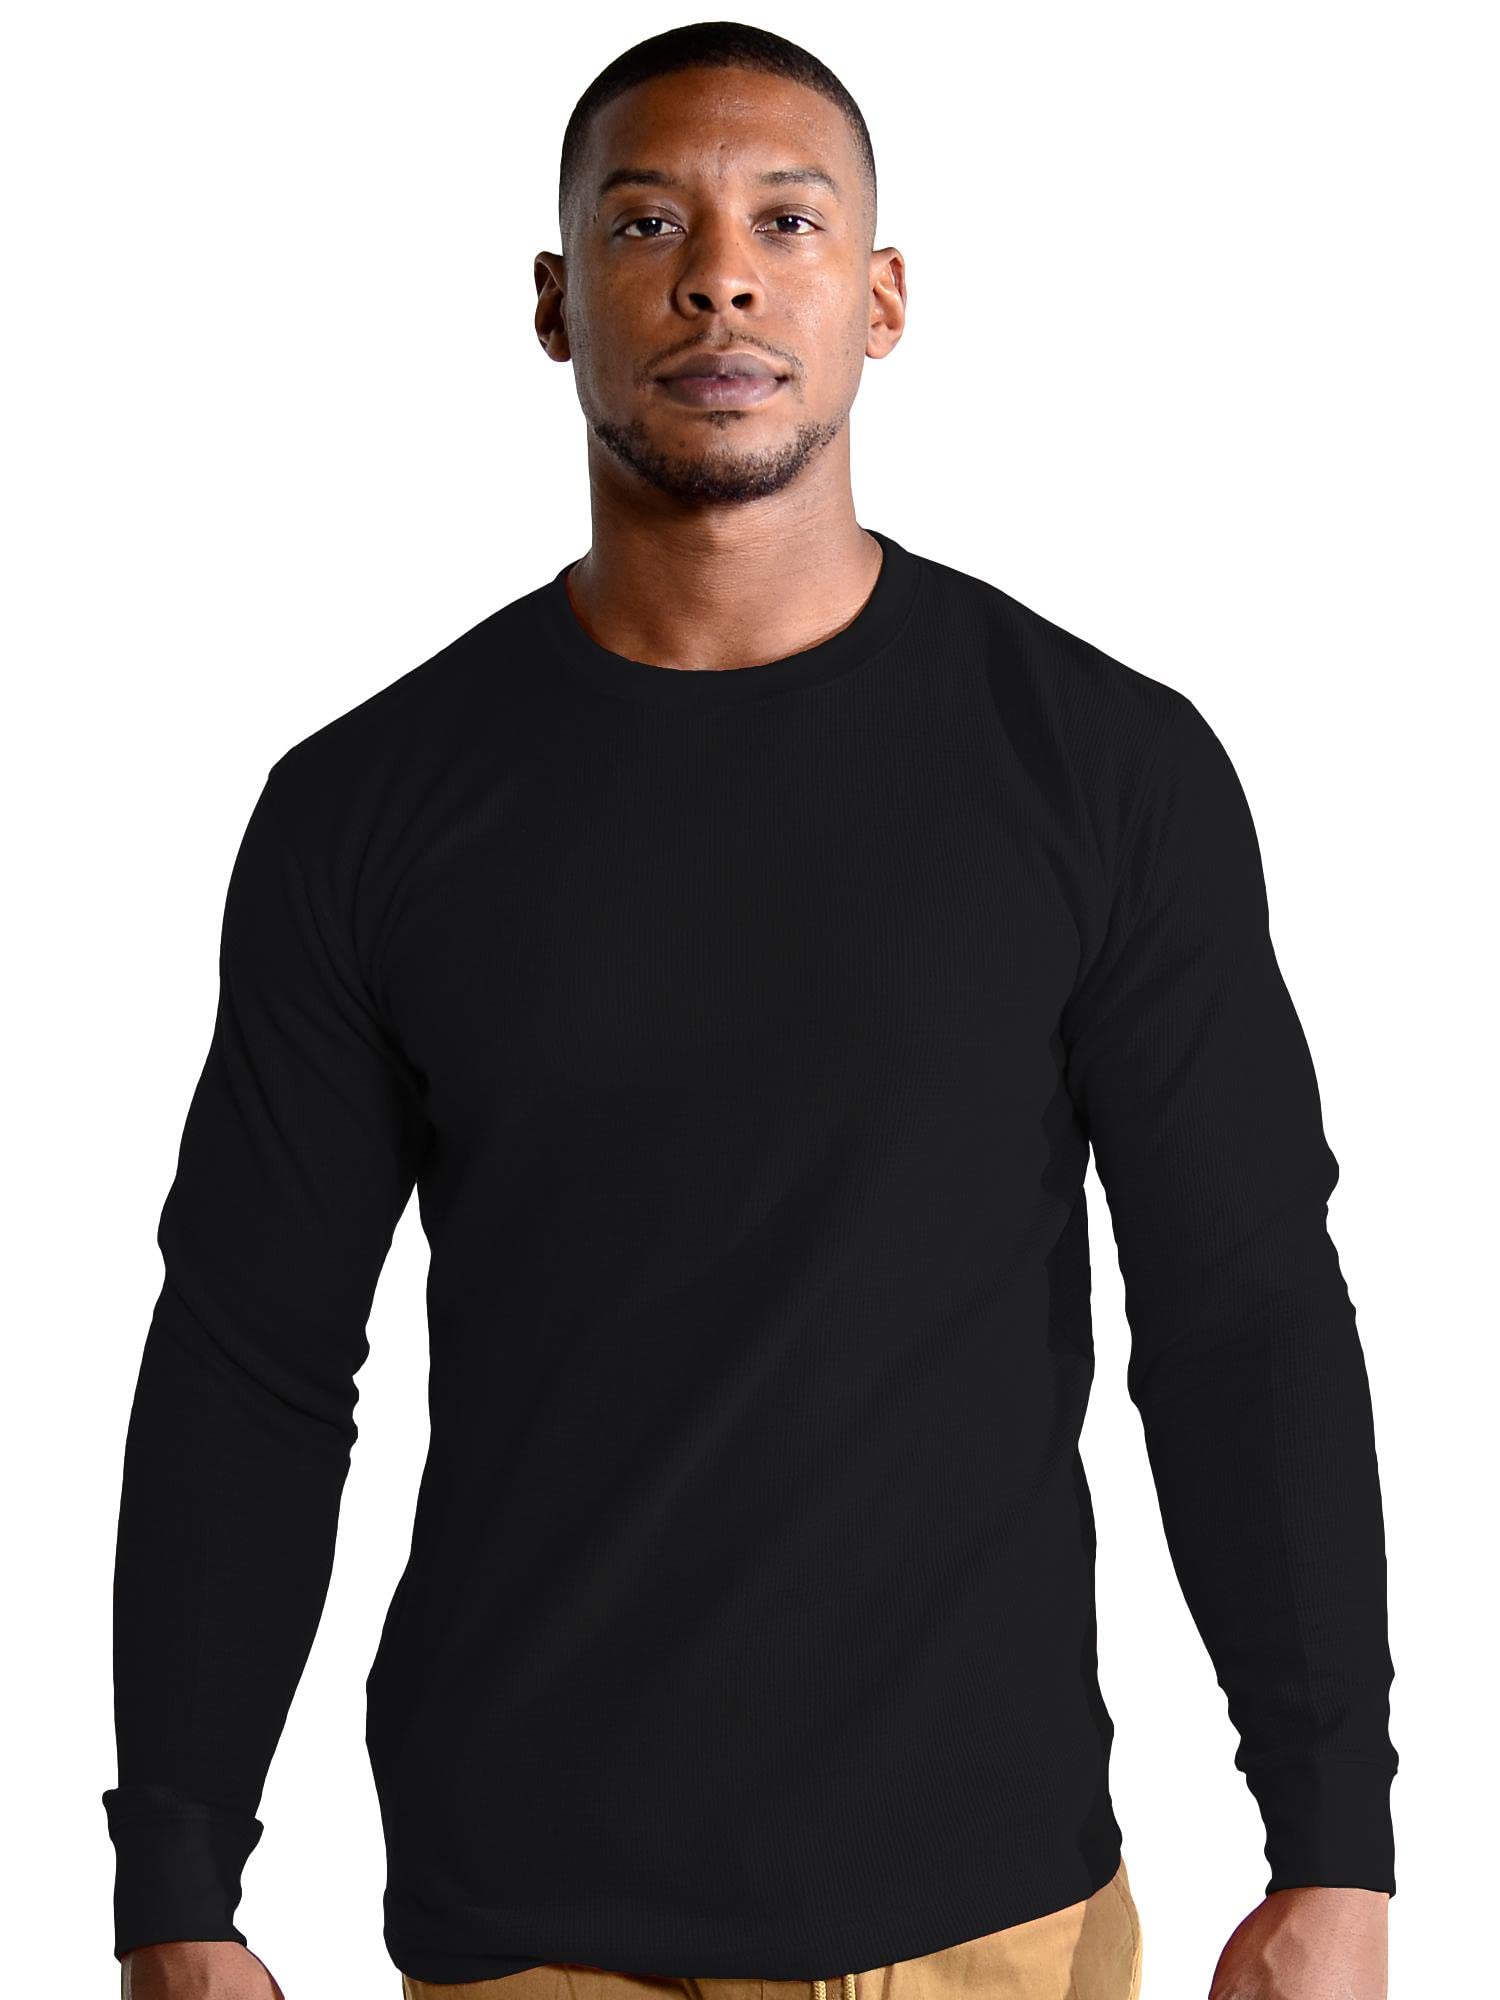 Evolution In Design Men's Basic Waffle Thermal Knit Sweater Long Sleeve  Crewneck T-Shirt Big Size Small to 6X-Large Medium Black